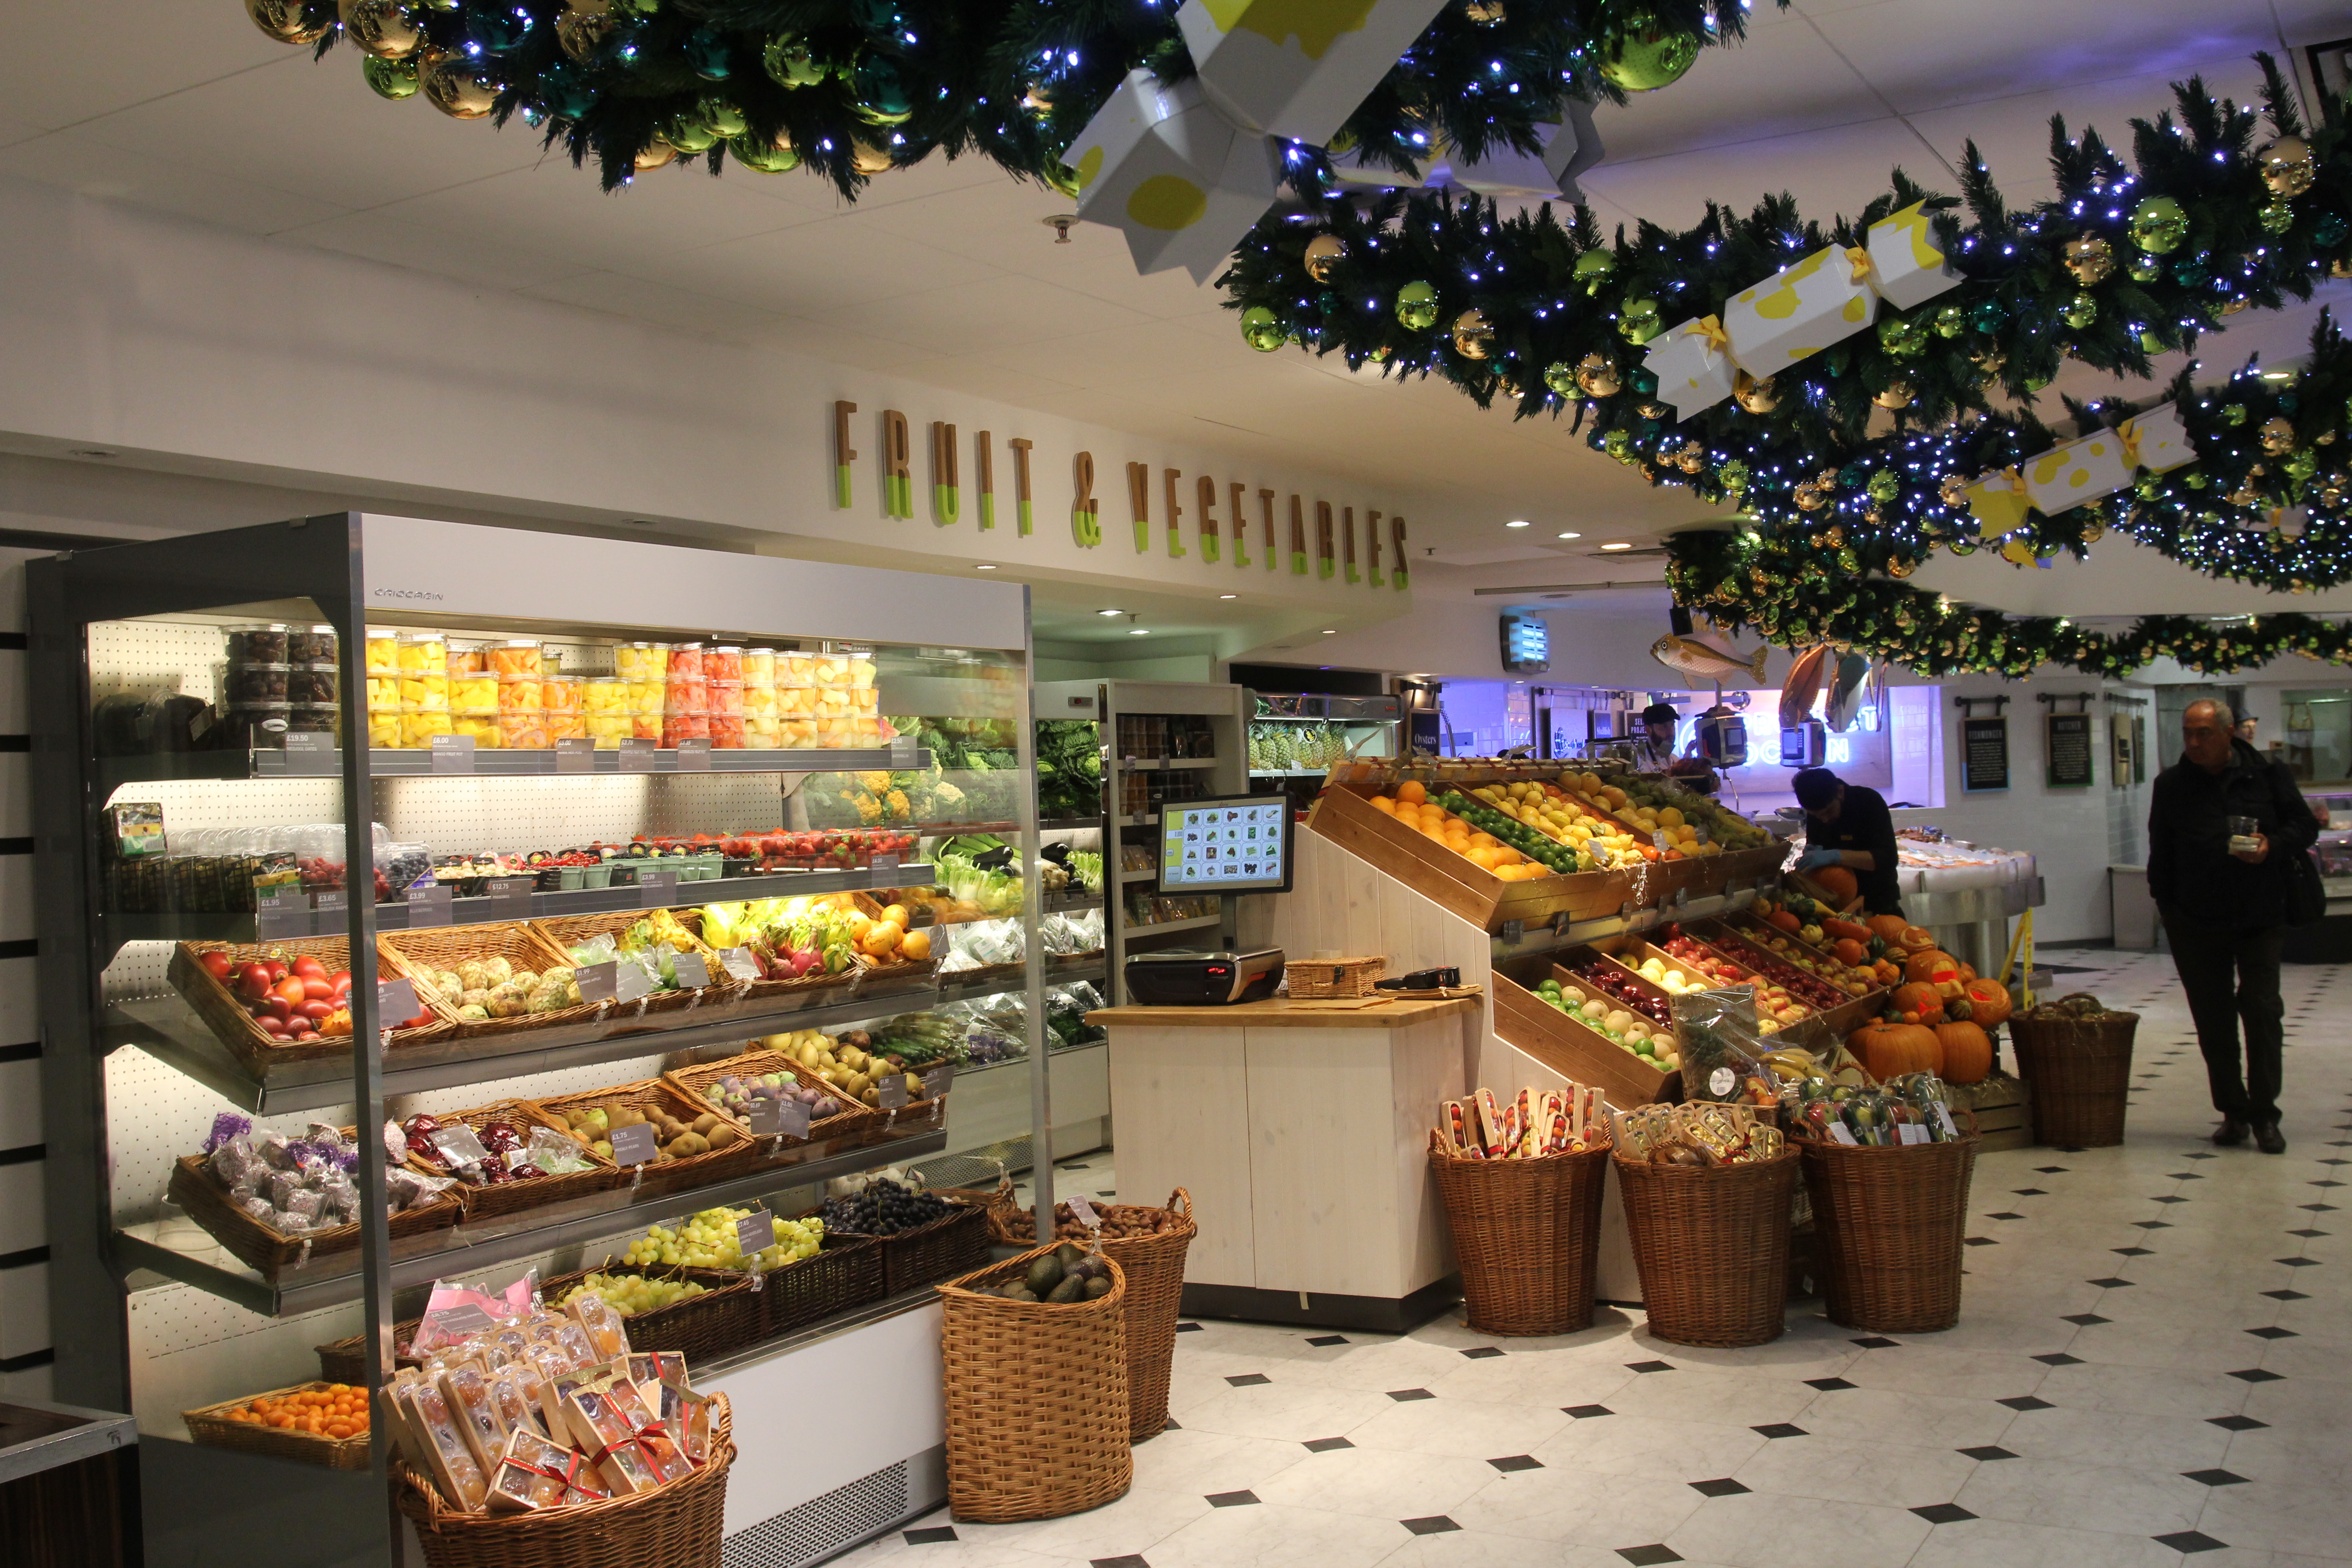 New Look For Selfridges Food Hall | News | Speciality Food Magazine